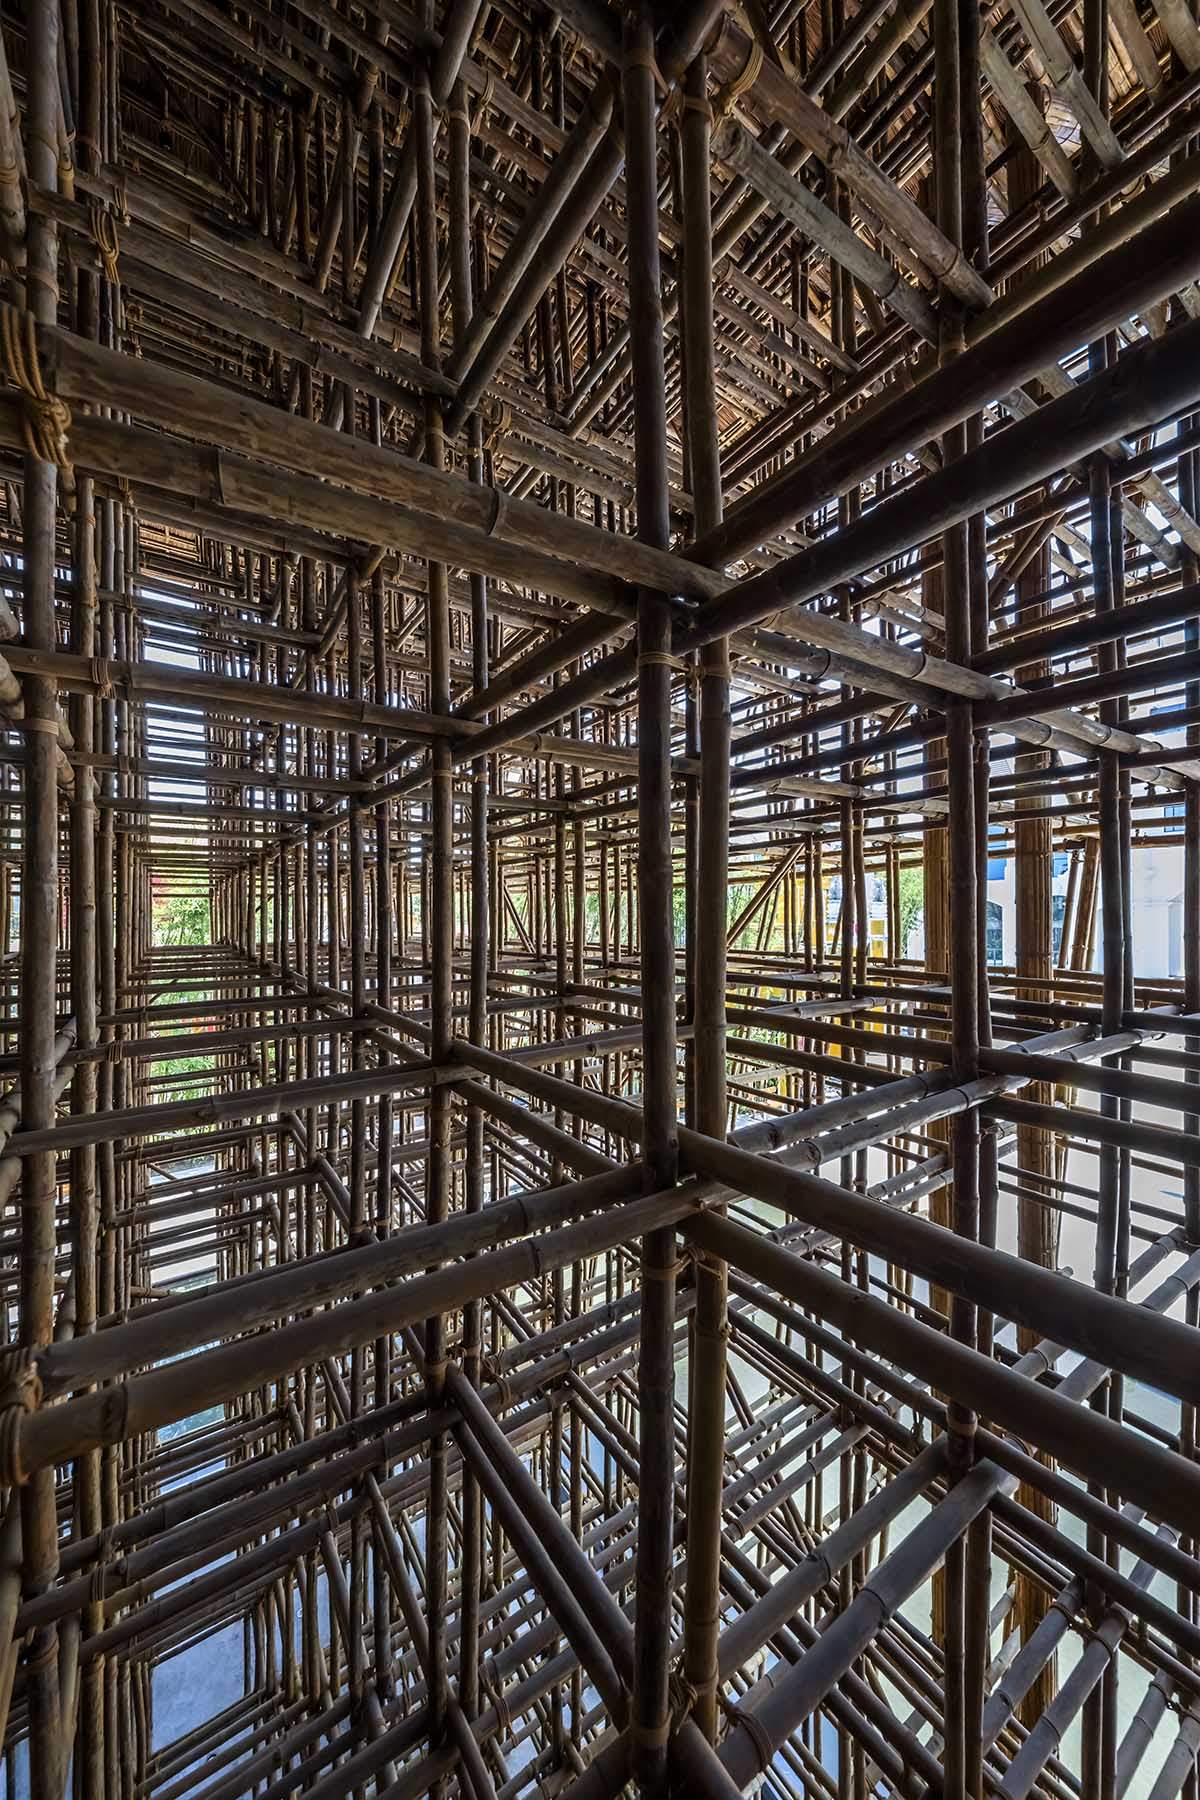 42000 bamboo reeds used to build a welcome center in Vietnam